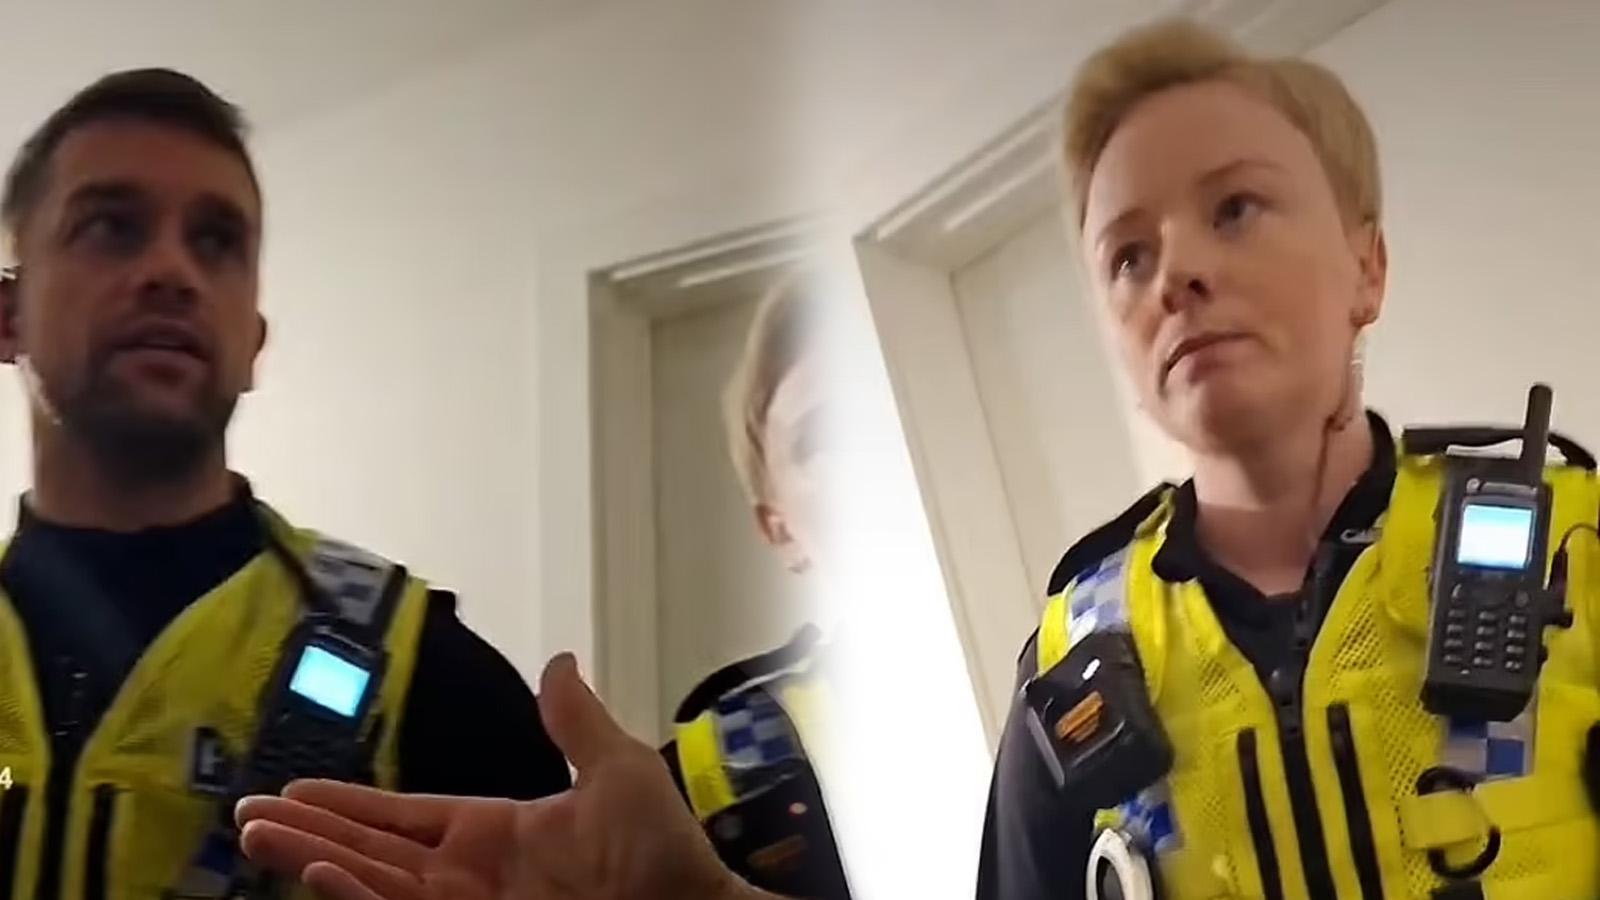 Autistic teen arrested for saying police officer looked like a lesbian